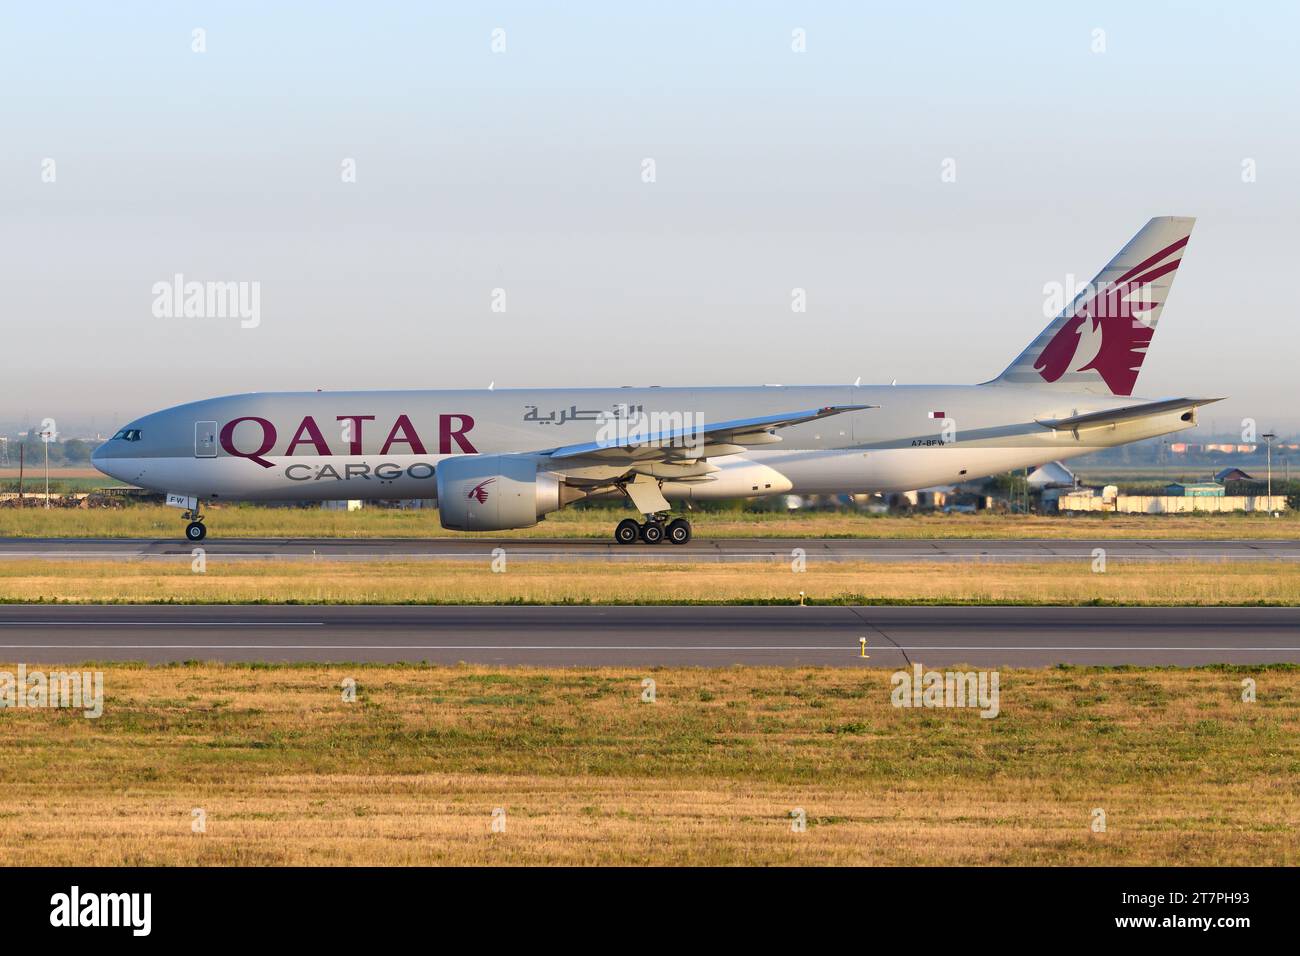 Qatar Cargo Boeing 777F aircraft taxiing. Airplane of model 777 for freigther transport of Qatar Cargo. Stock Photo